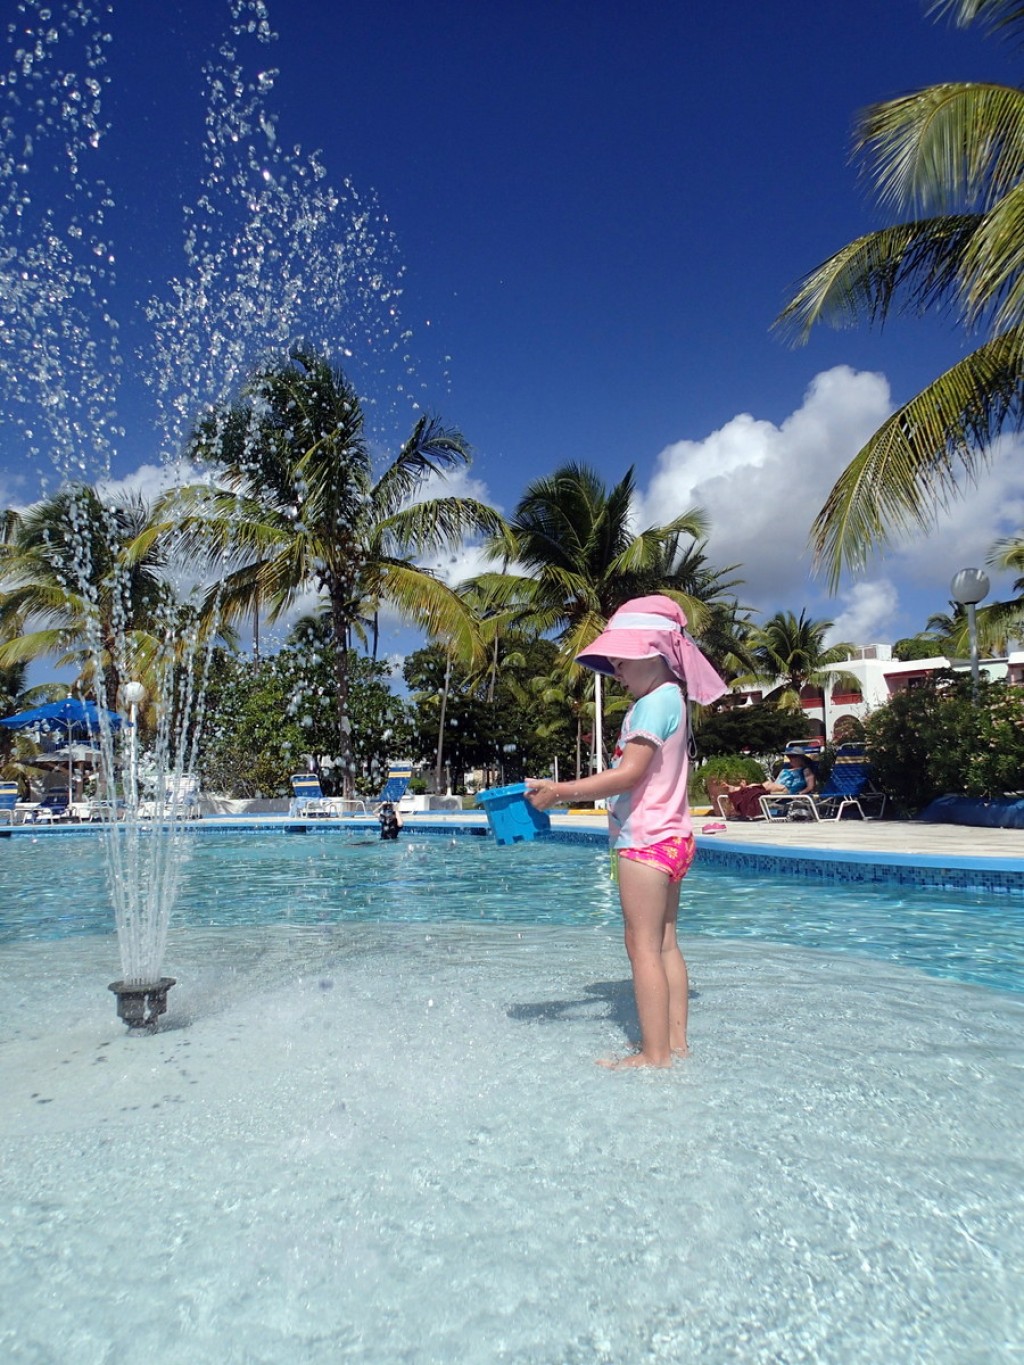 We stayed at the Jolly Beach Resort, an affordable all-inclusive in Antigua.  Although it was worn around the edges in spots, we still had a great time and it was fantastic value for the money. 